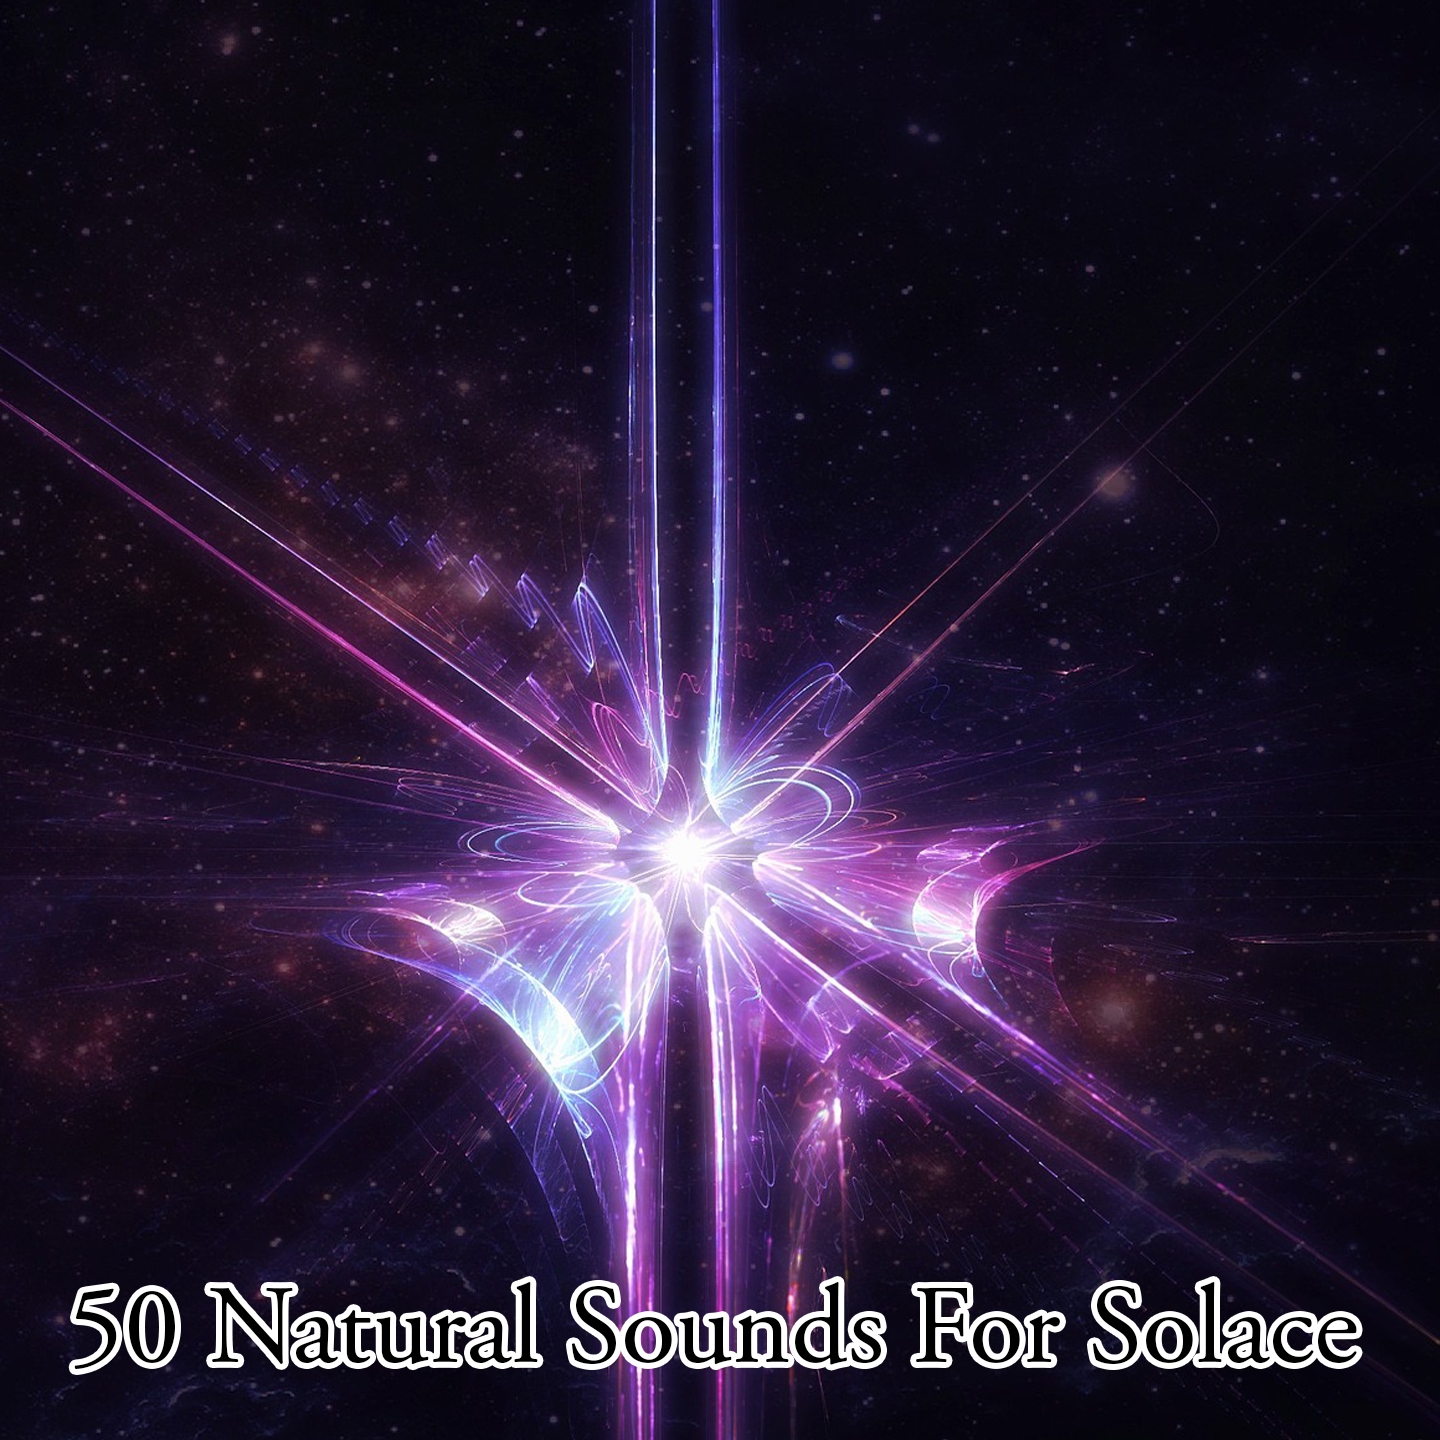 50 Natural Sounds For Solace